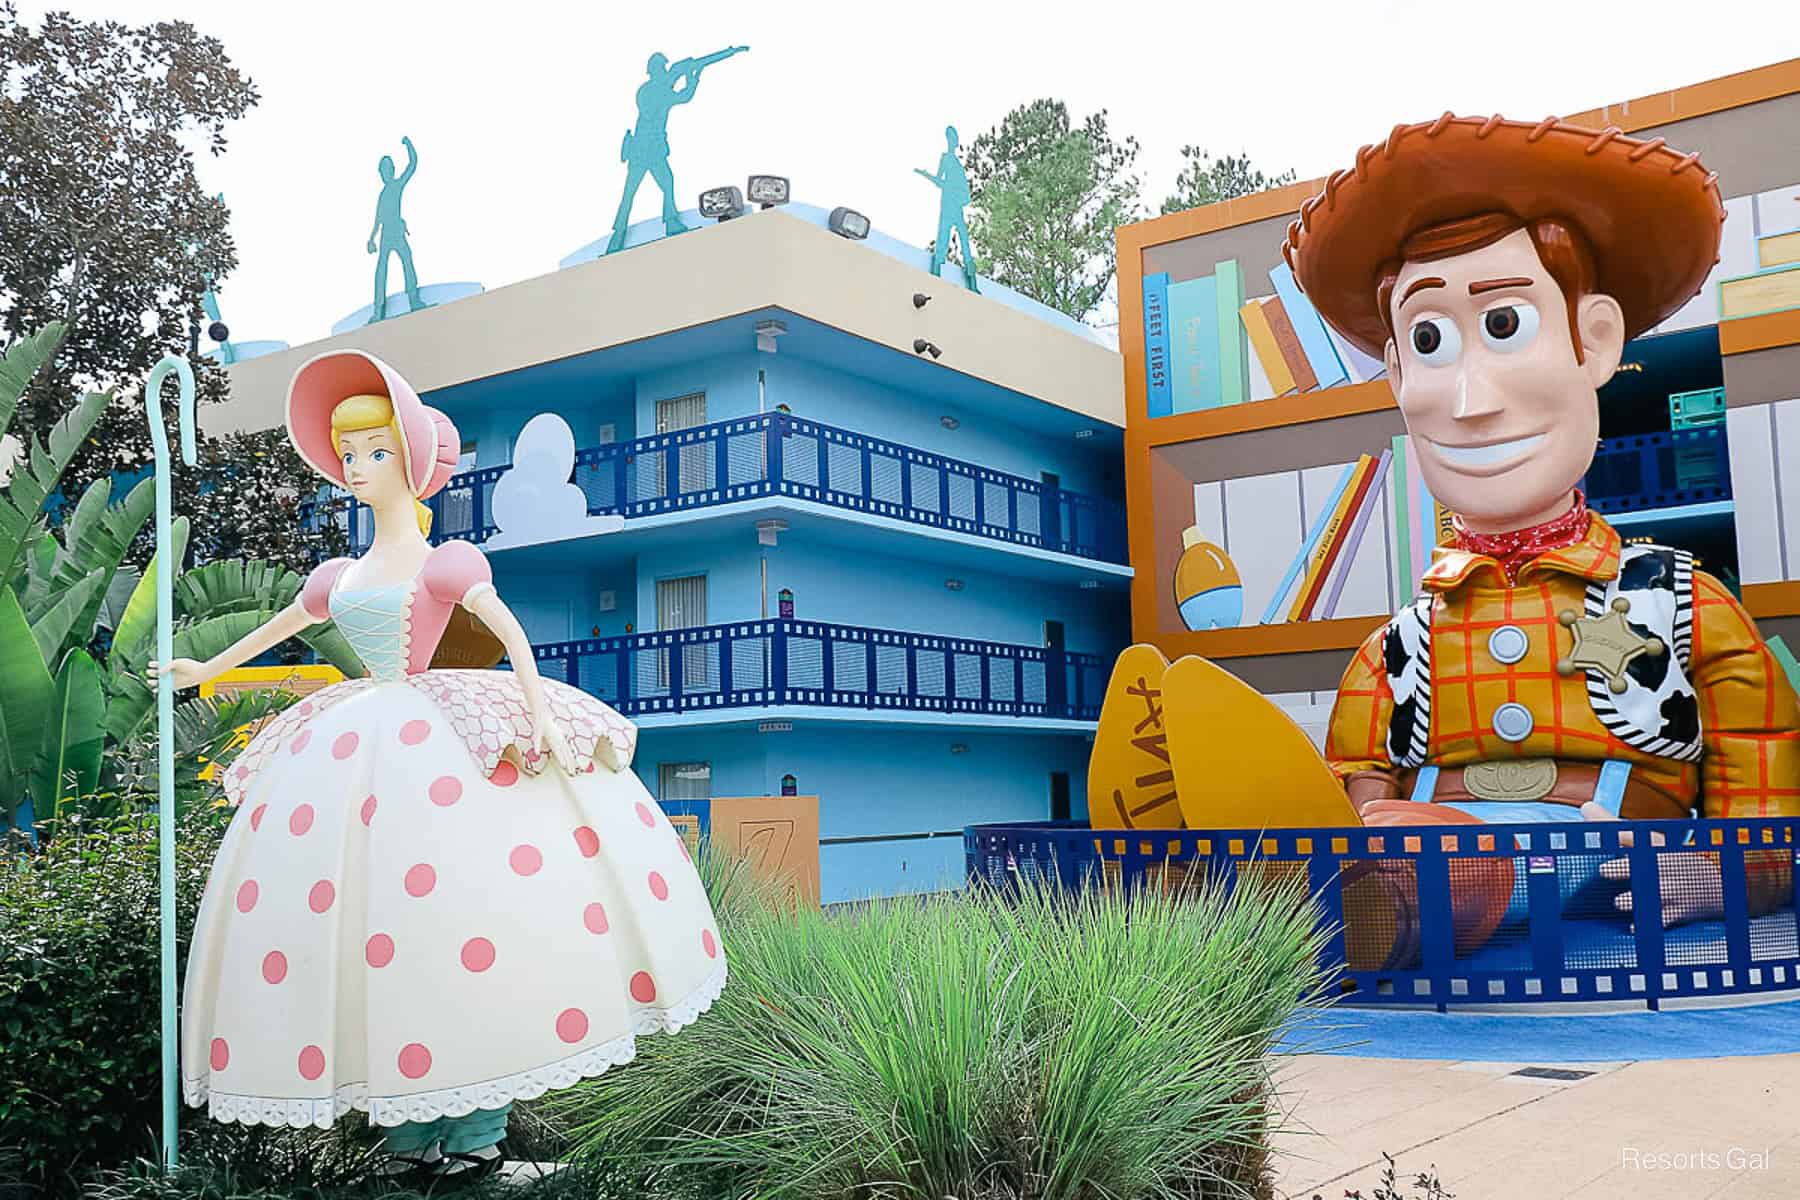 The Toy Story section of All-Star Movies with Bo Peep and Woody 